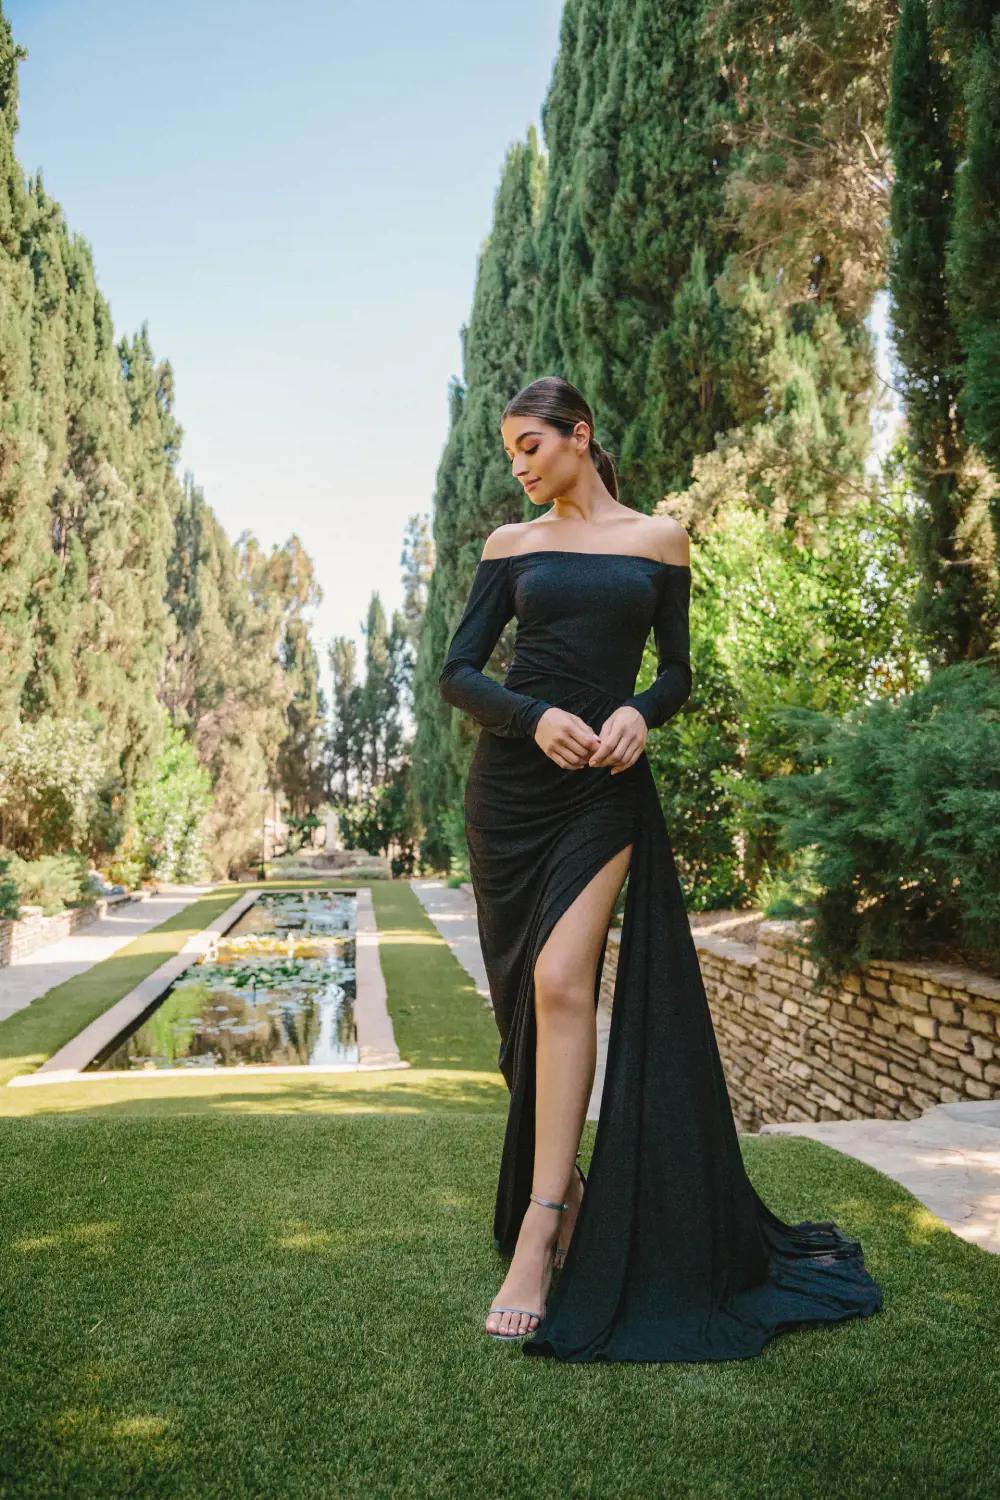 Model wearing a black evening gown